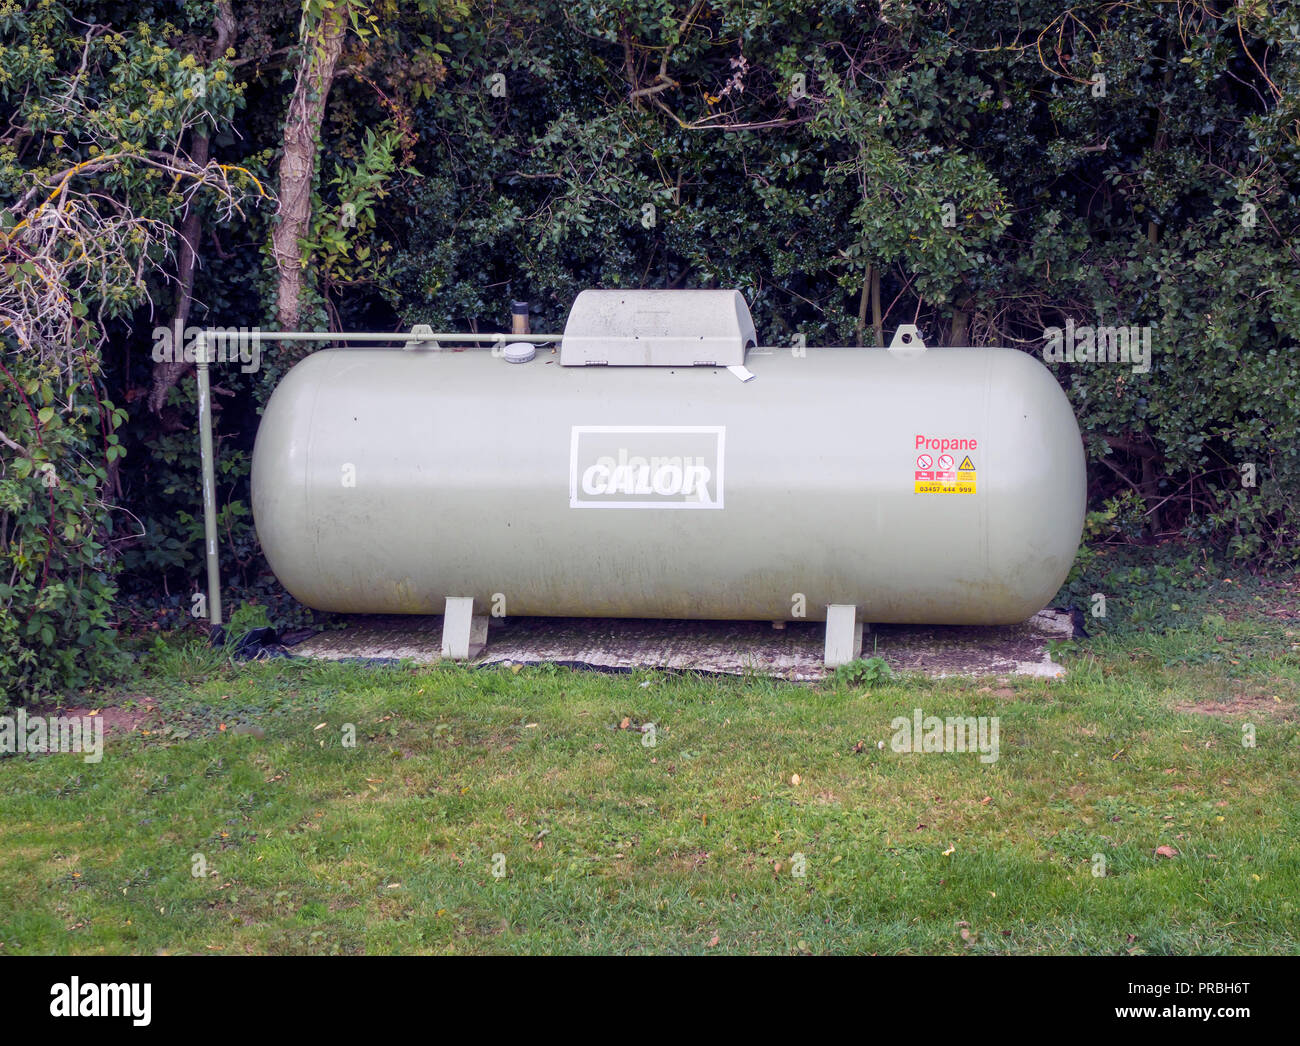 A Calor Propane gas storage cylinder supplying gas fuelling a restaurant in a rural location Stock Photo